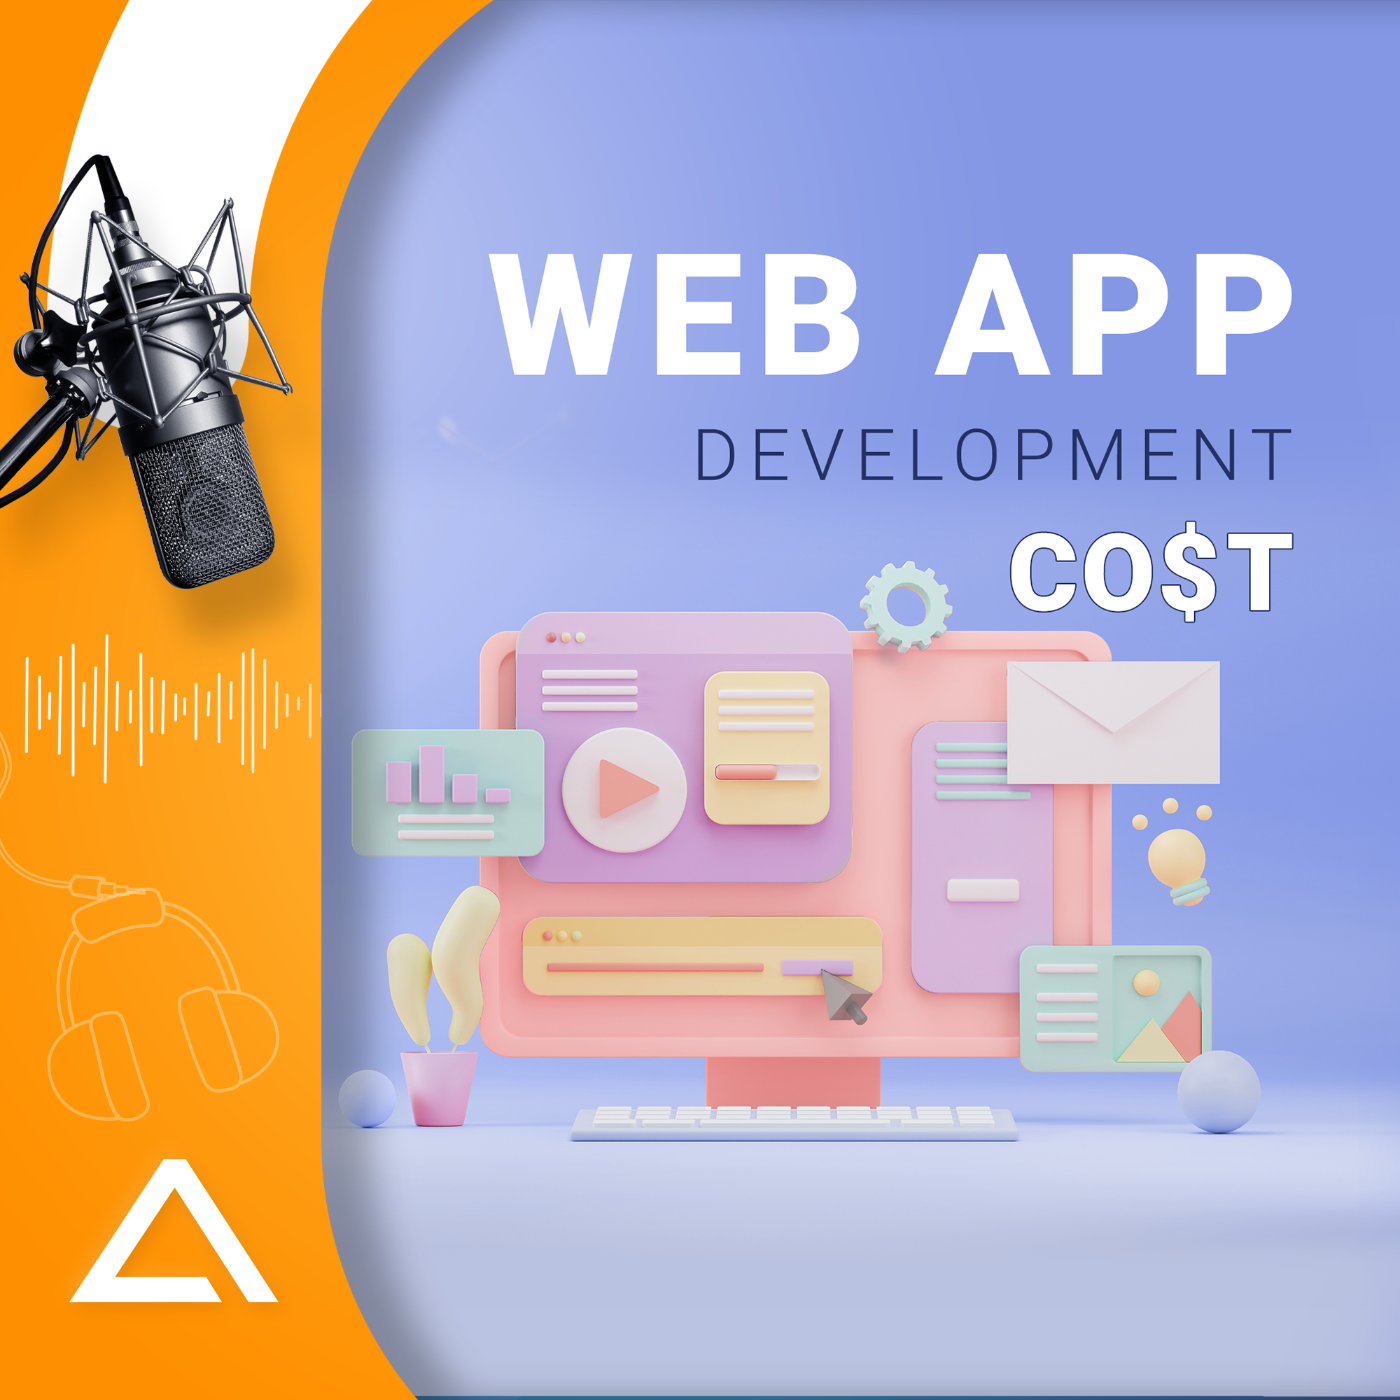 How Much Does It Cost to Develop a Web App? : Podcast